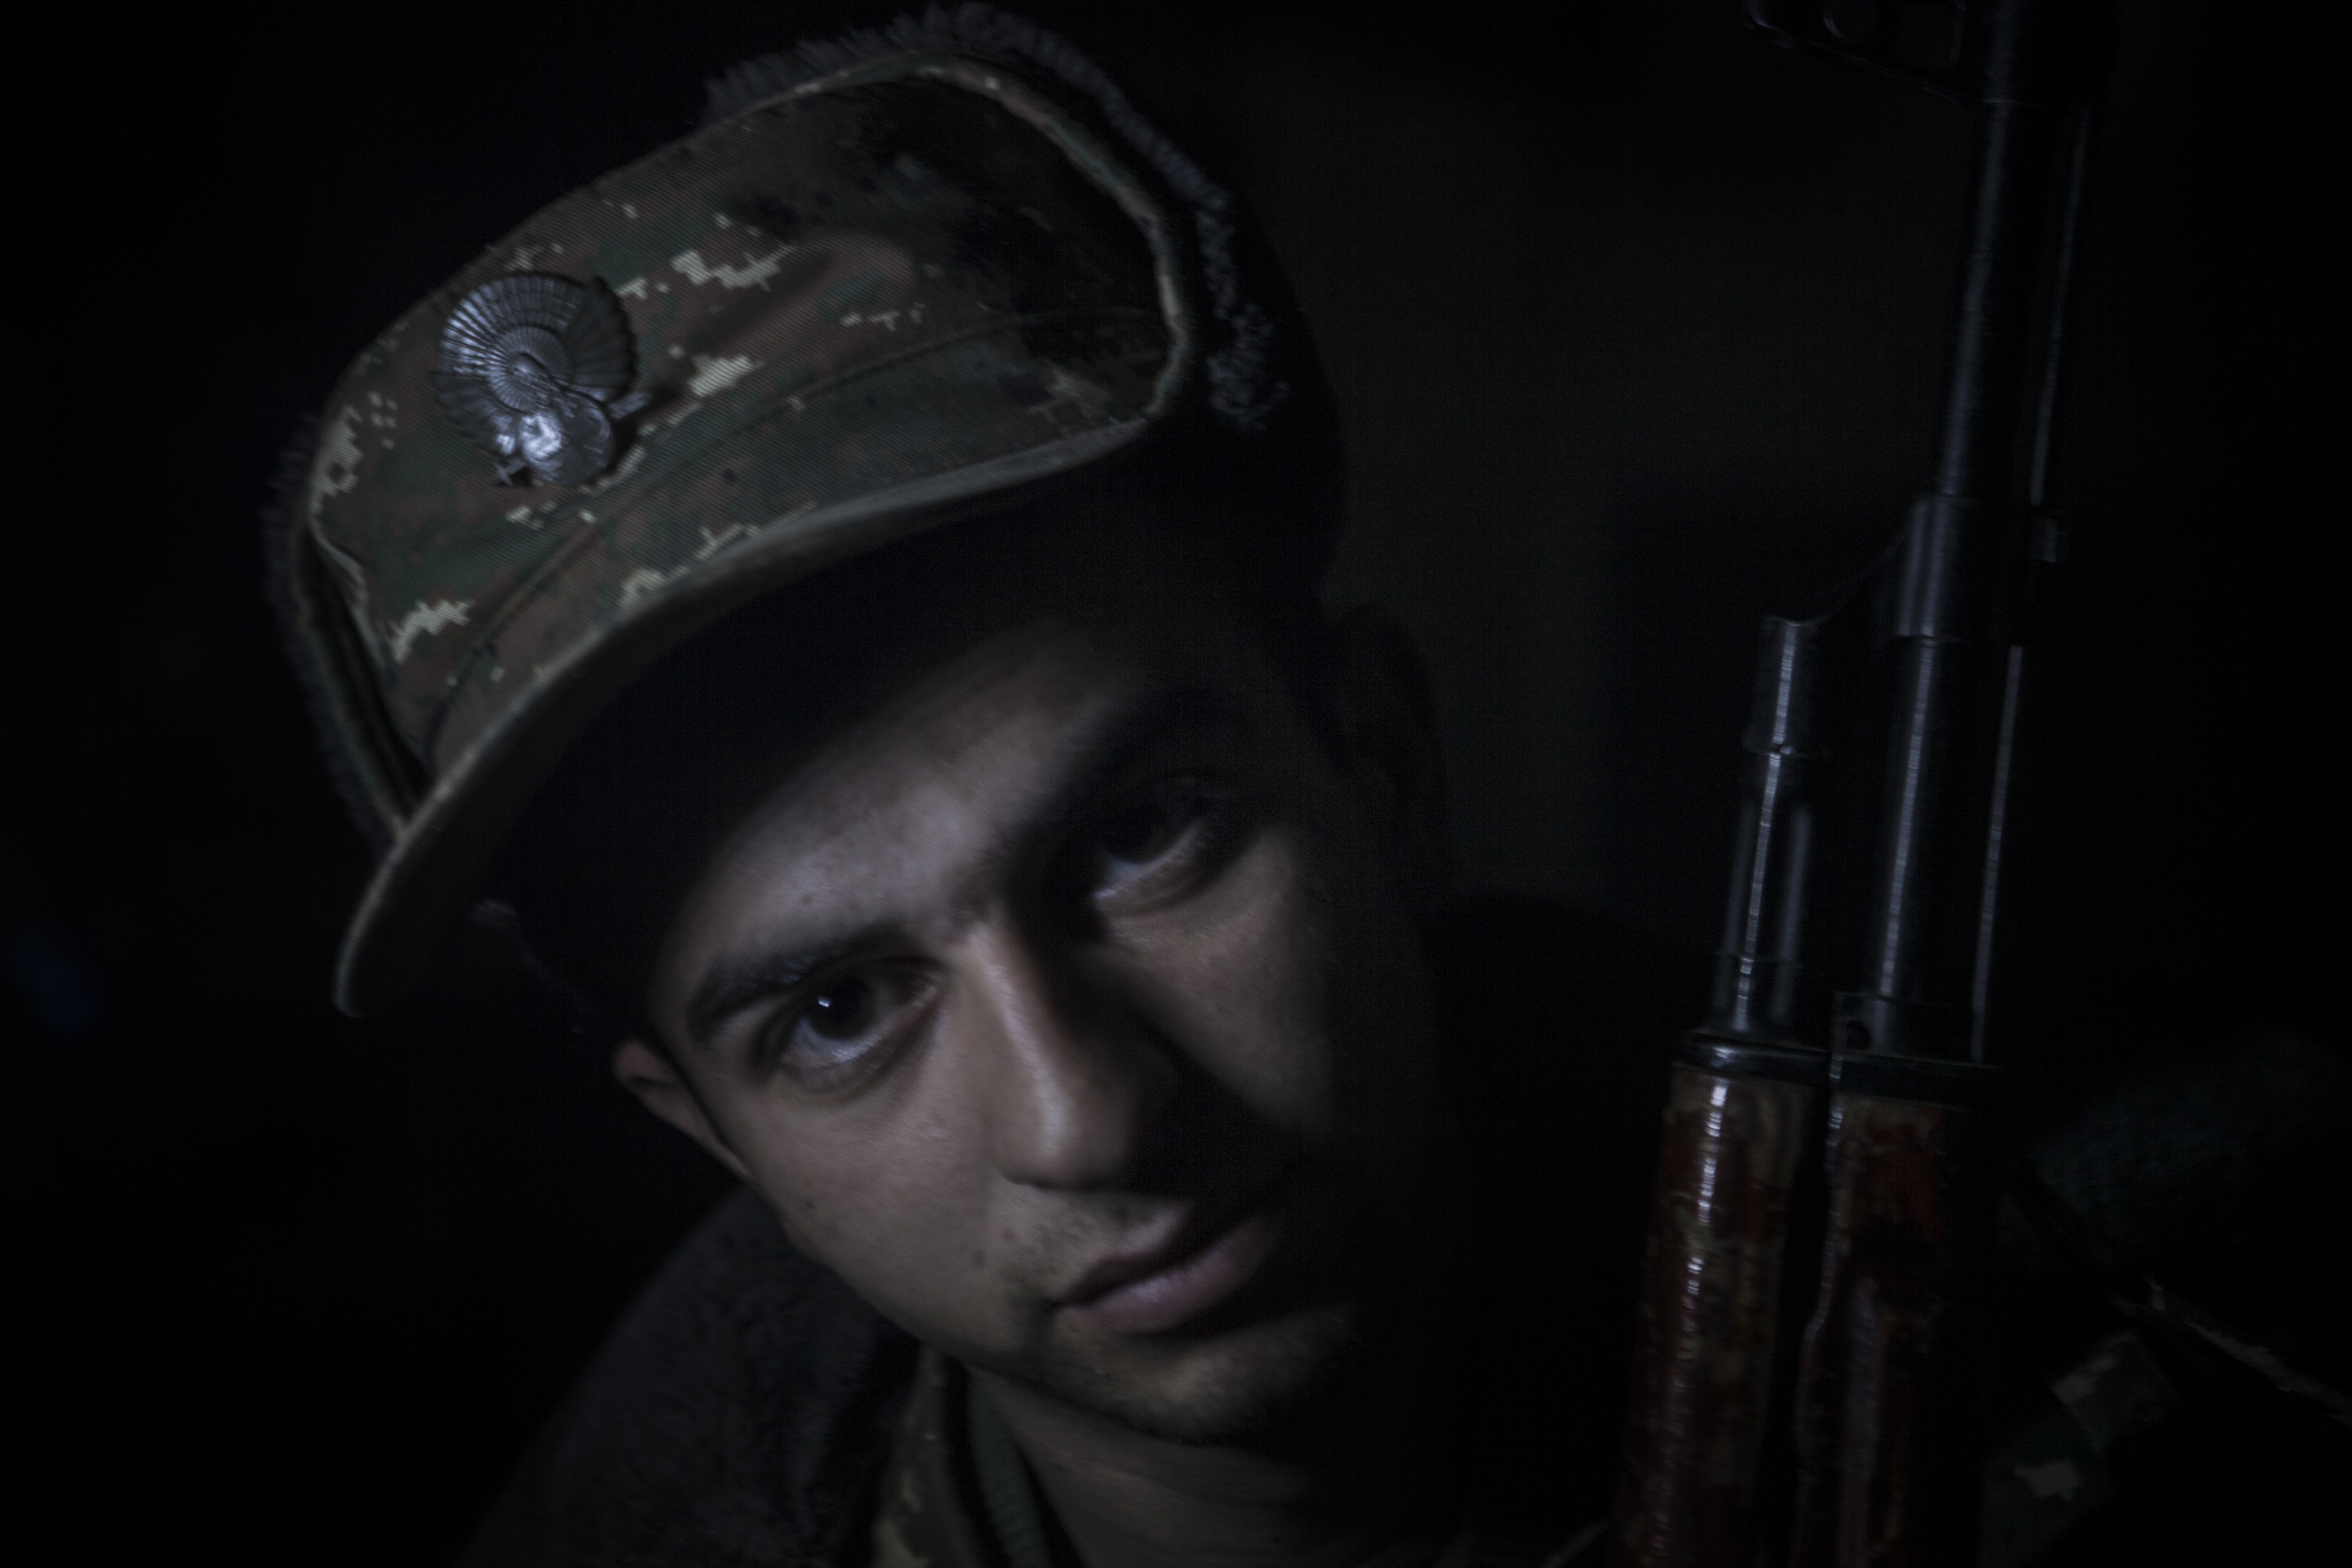  Soldiers awaiting orders in darkness, lit only by kerosene lanterns, at a military base in Mataghis, Karabakh on April 5. 